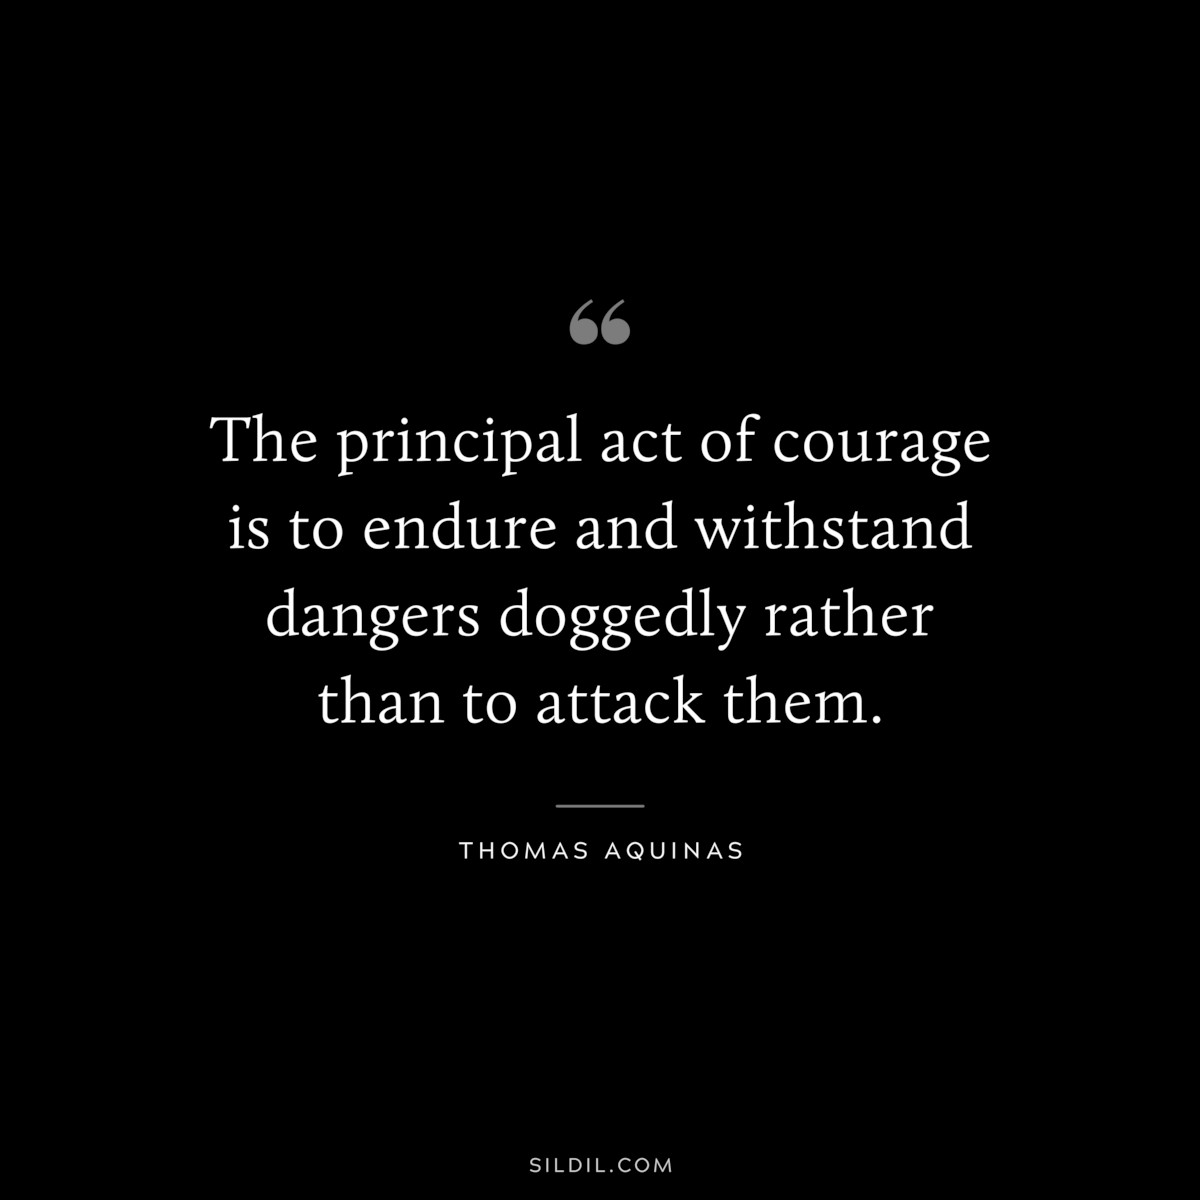 The principal act of courage is to endure and withstand dangers doggedly rather than to attack them. ― Thomas Aquinas